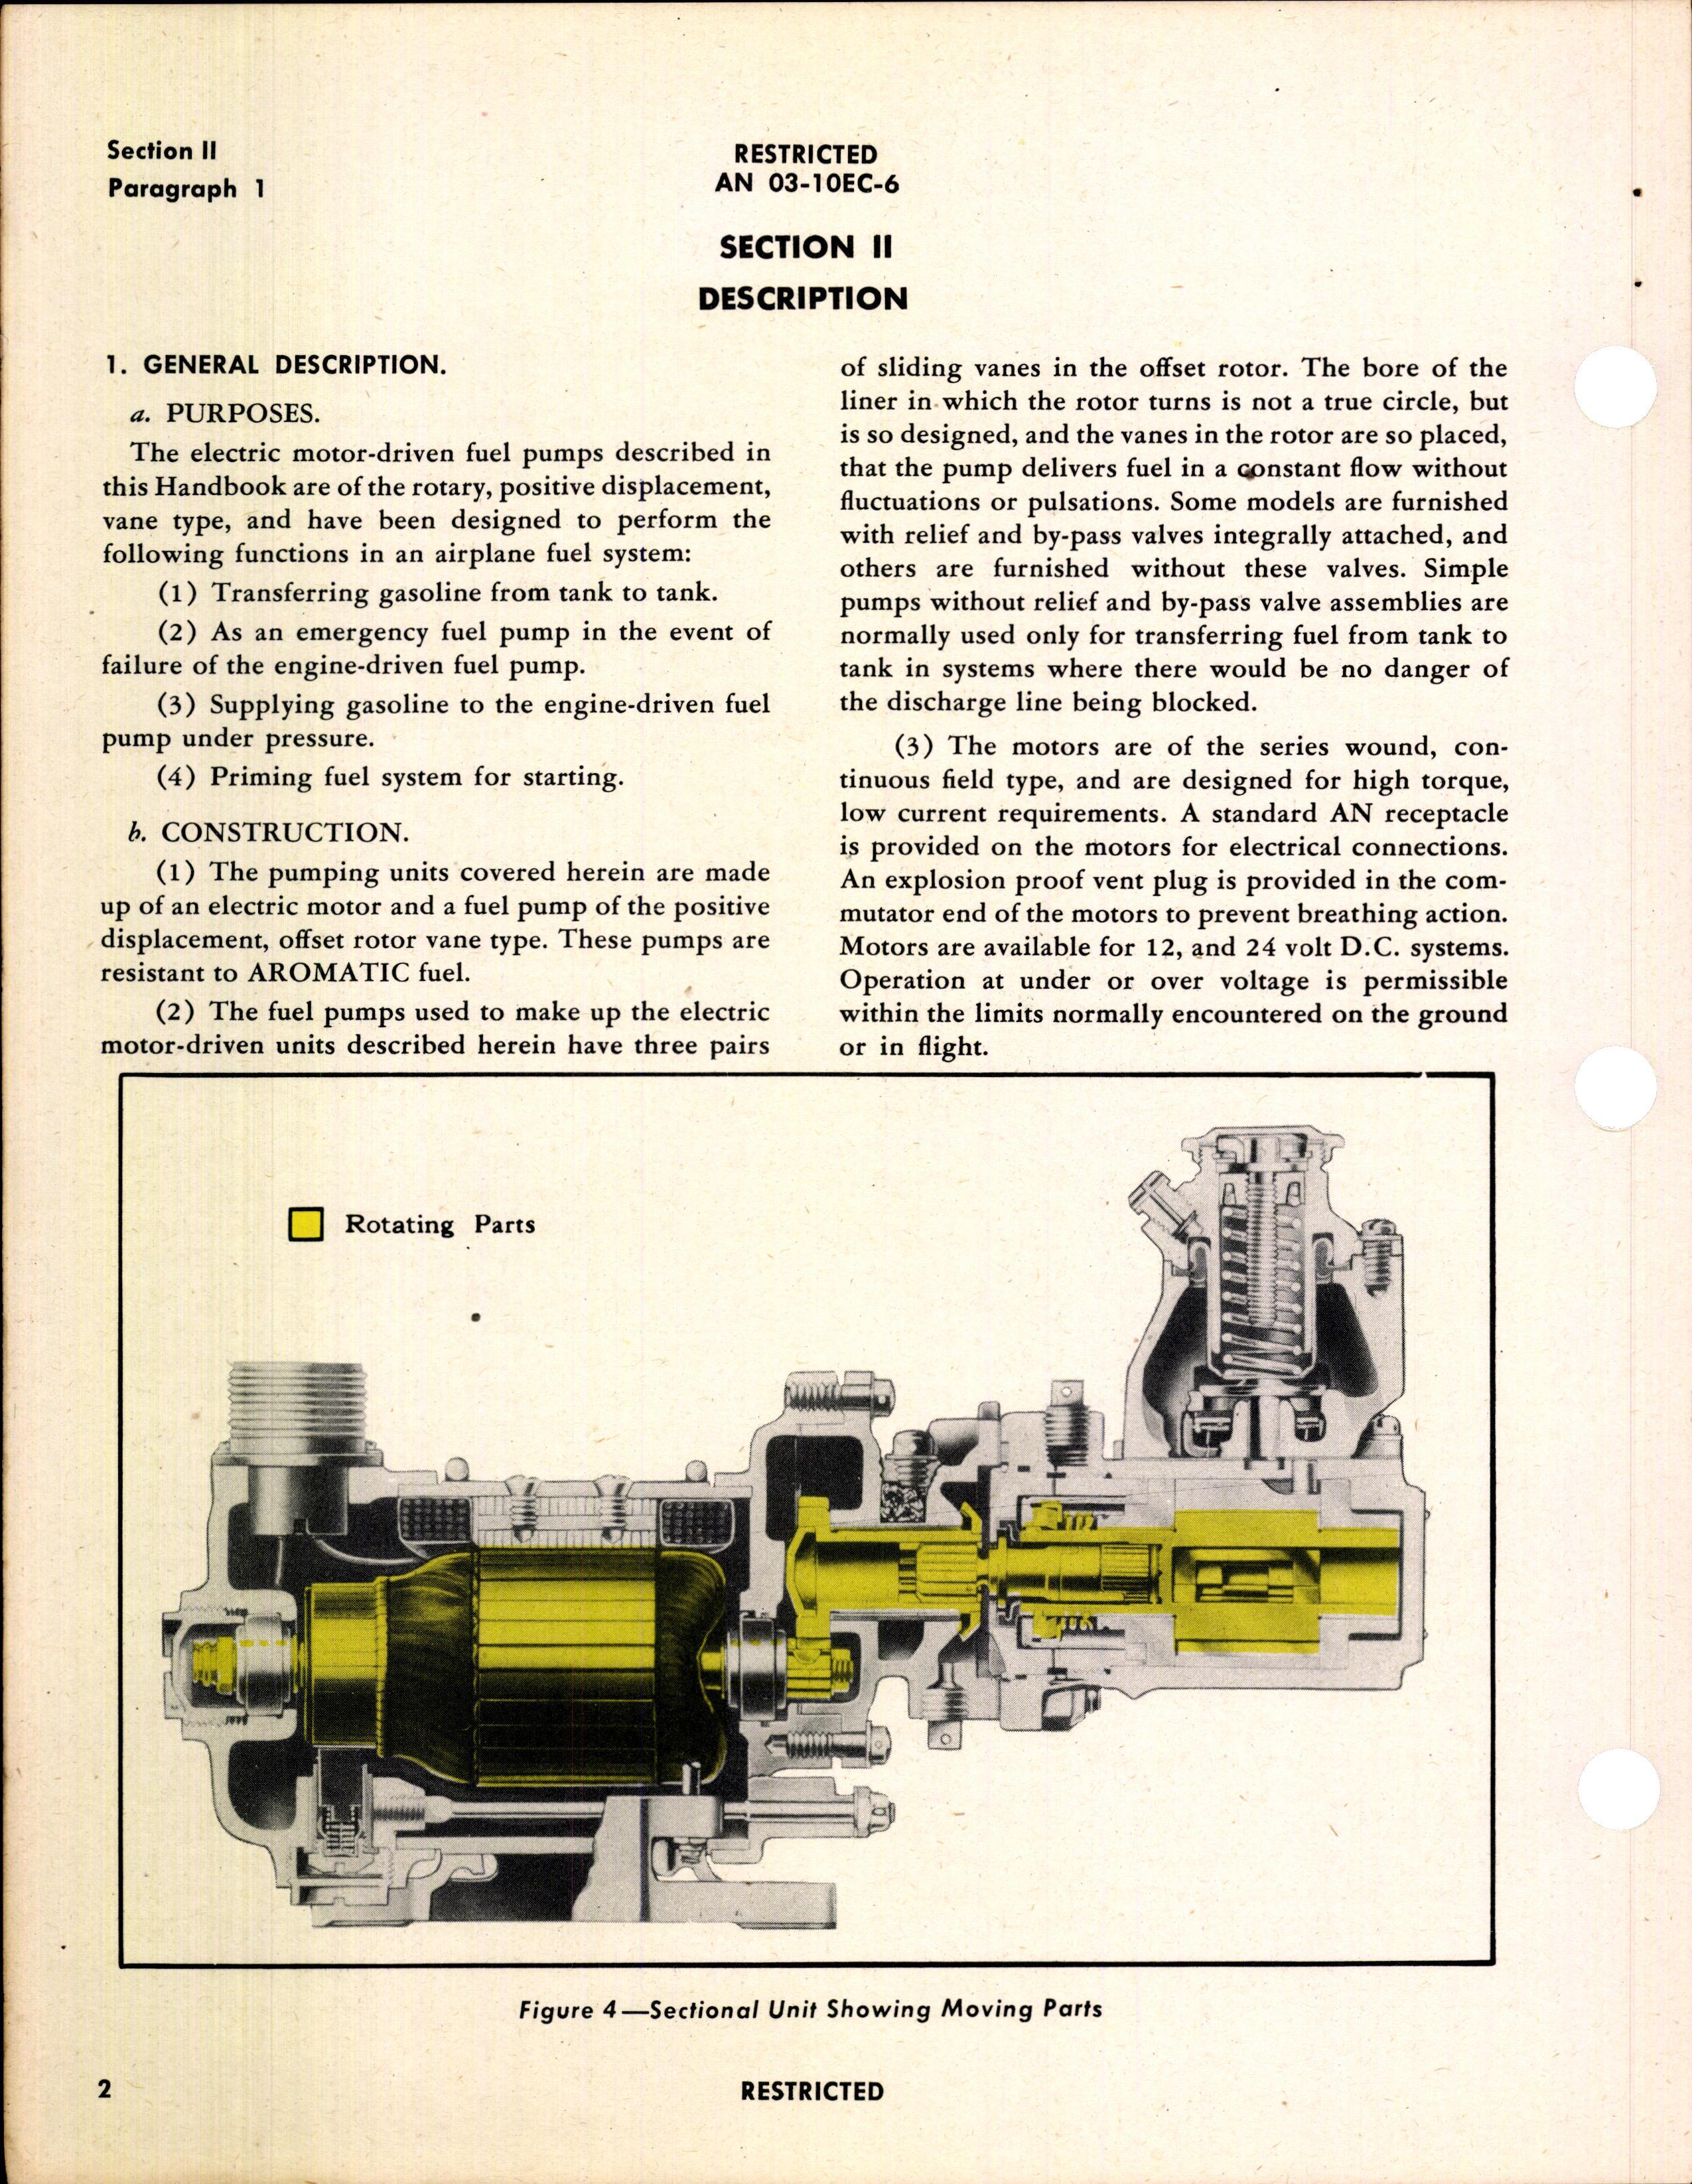 Sample page 8 from AirCorps Library document: Handbook of Instructions with Parts Catalog for Thompson Electric Motor-Driven Fuel Pumps